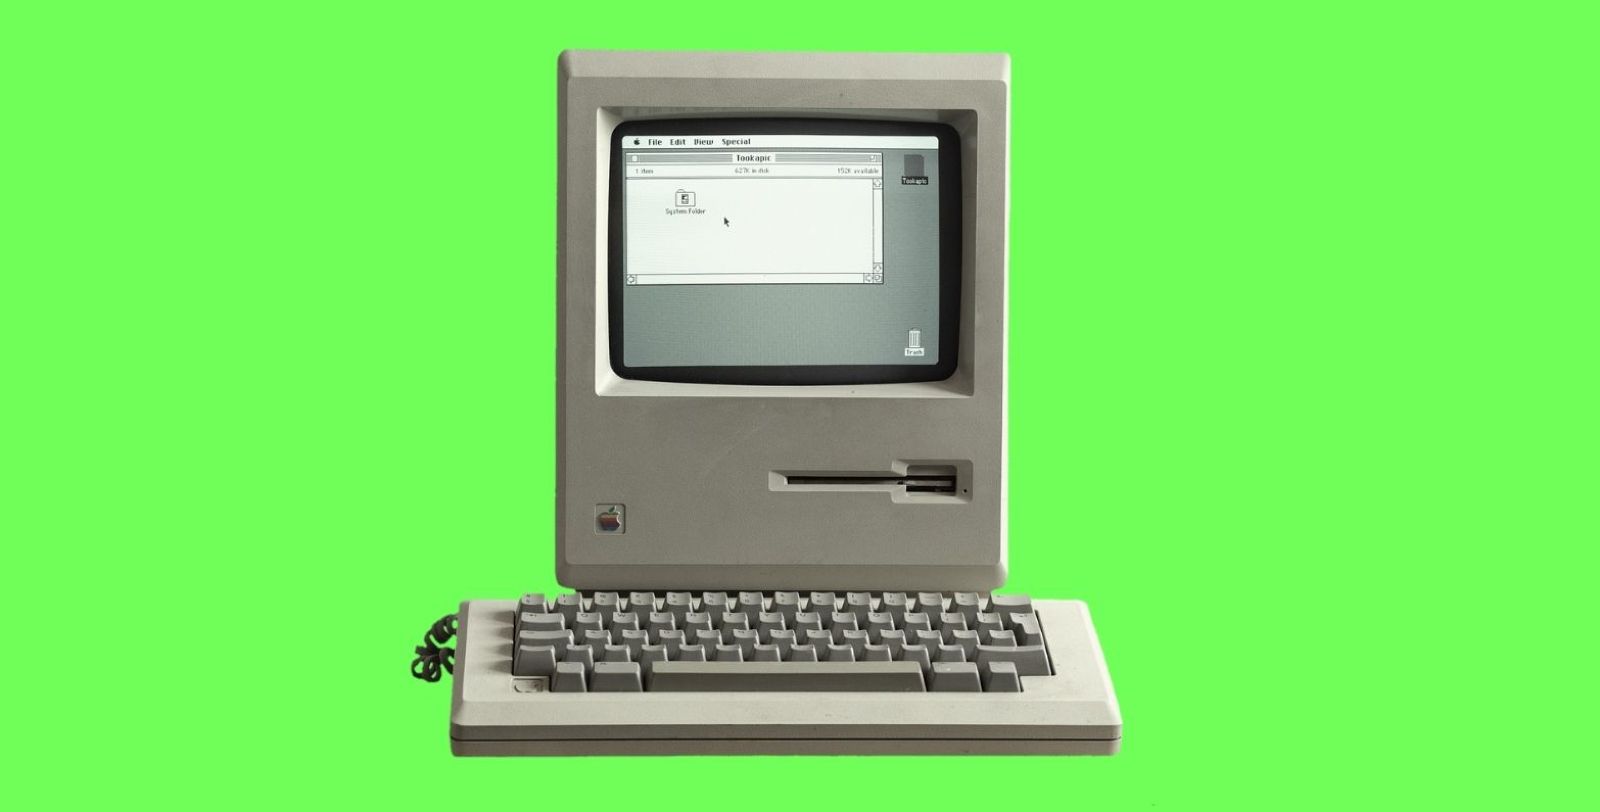 Vintage personal computer on green background